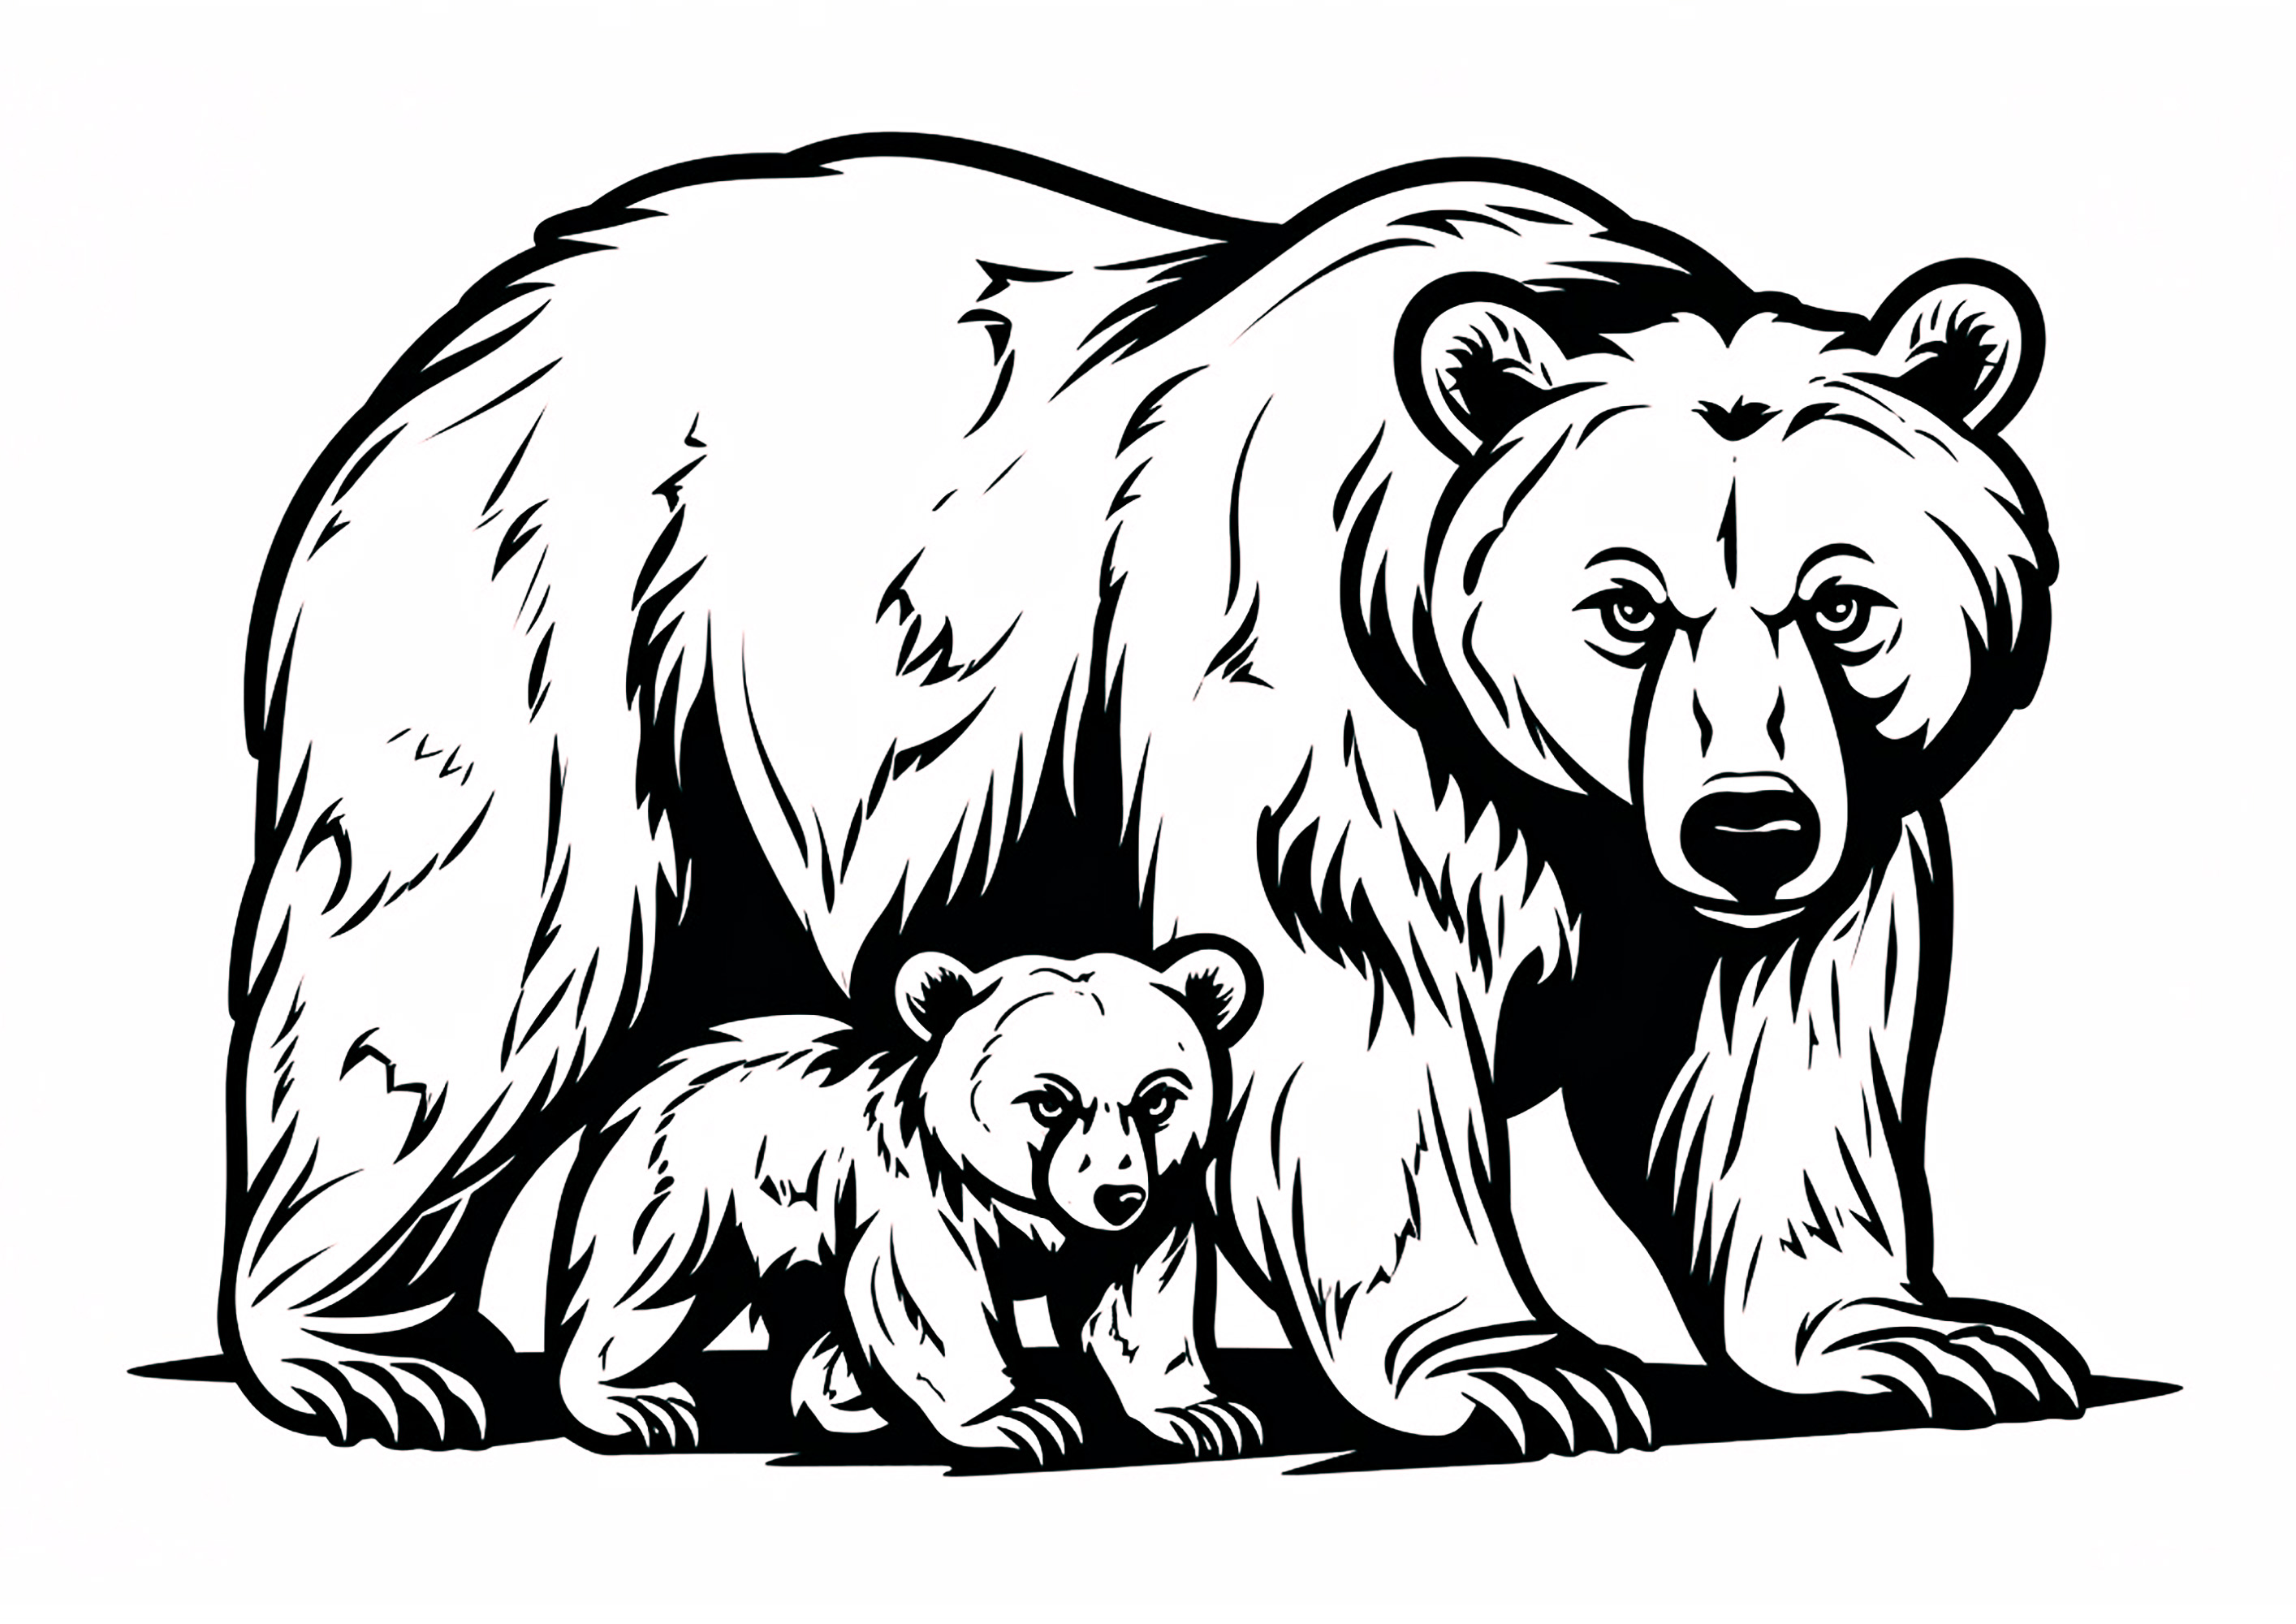 Two bears in a thickly contoured design